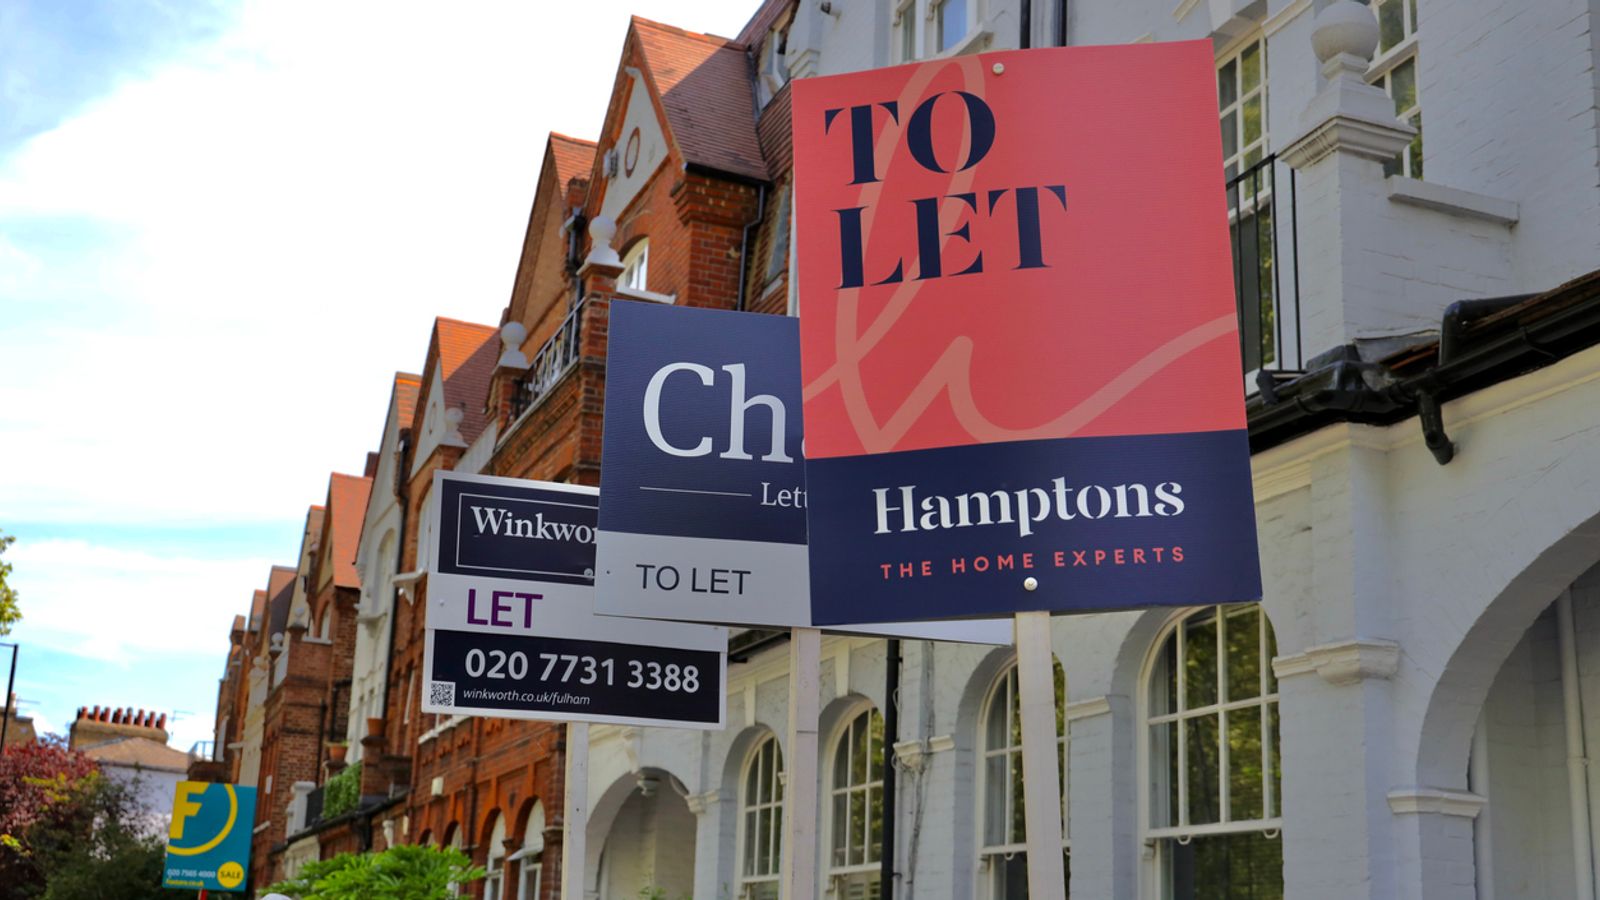 Private rental costs rise across Britain - while house price growth declines